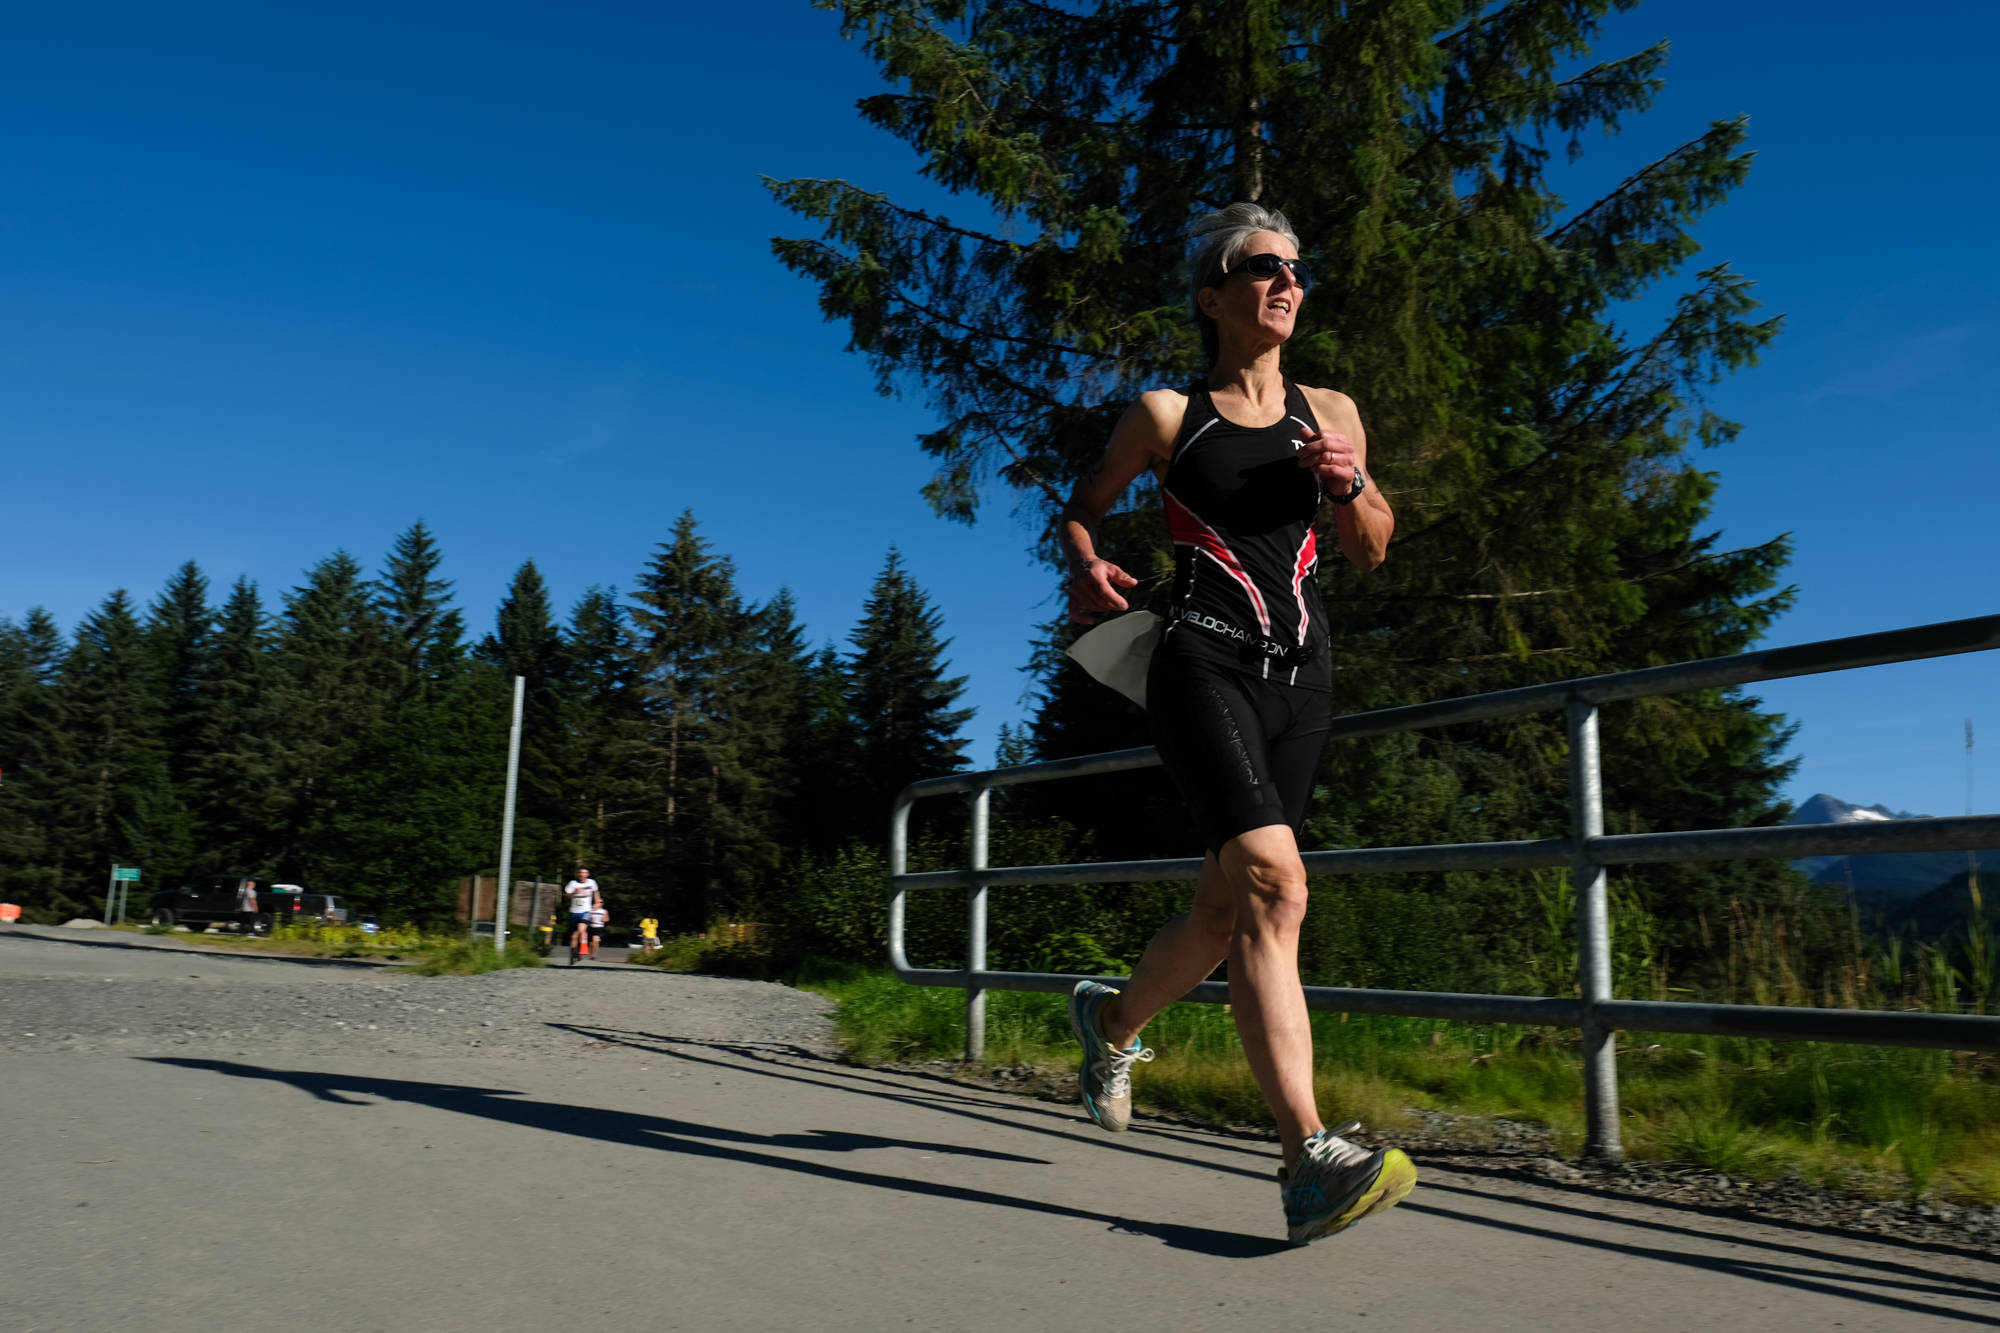 A competitor makes her way to the Auke Lake Trail Saturday during the last leg of the Aukeman Triathlon. (Konrad Frank | For the Juneau Empire)